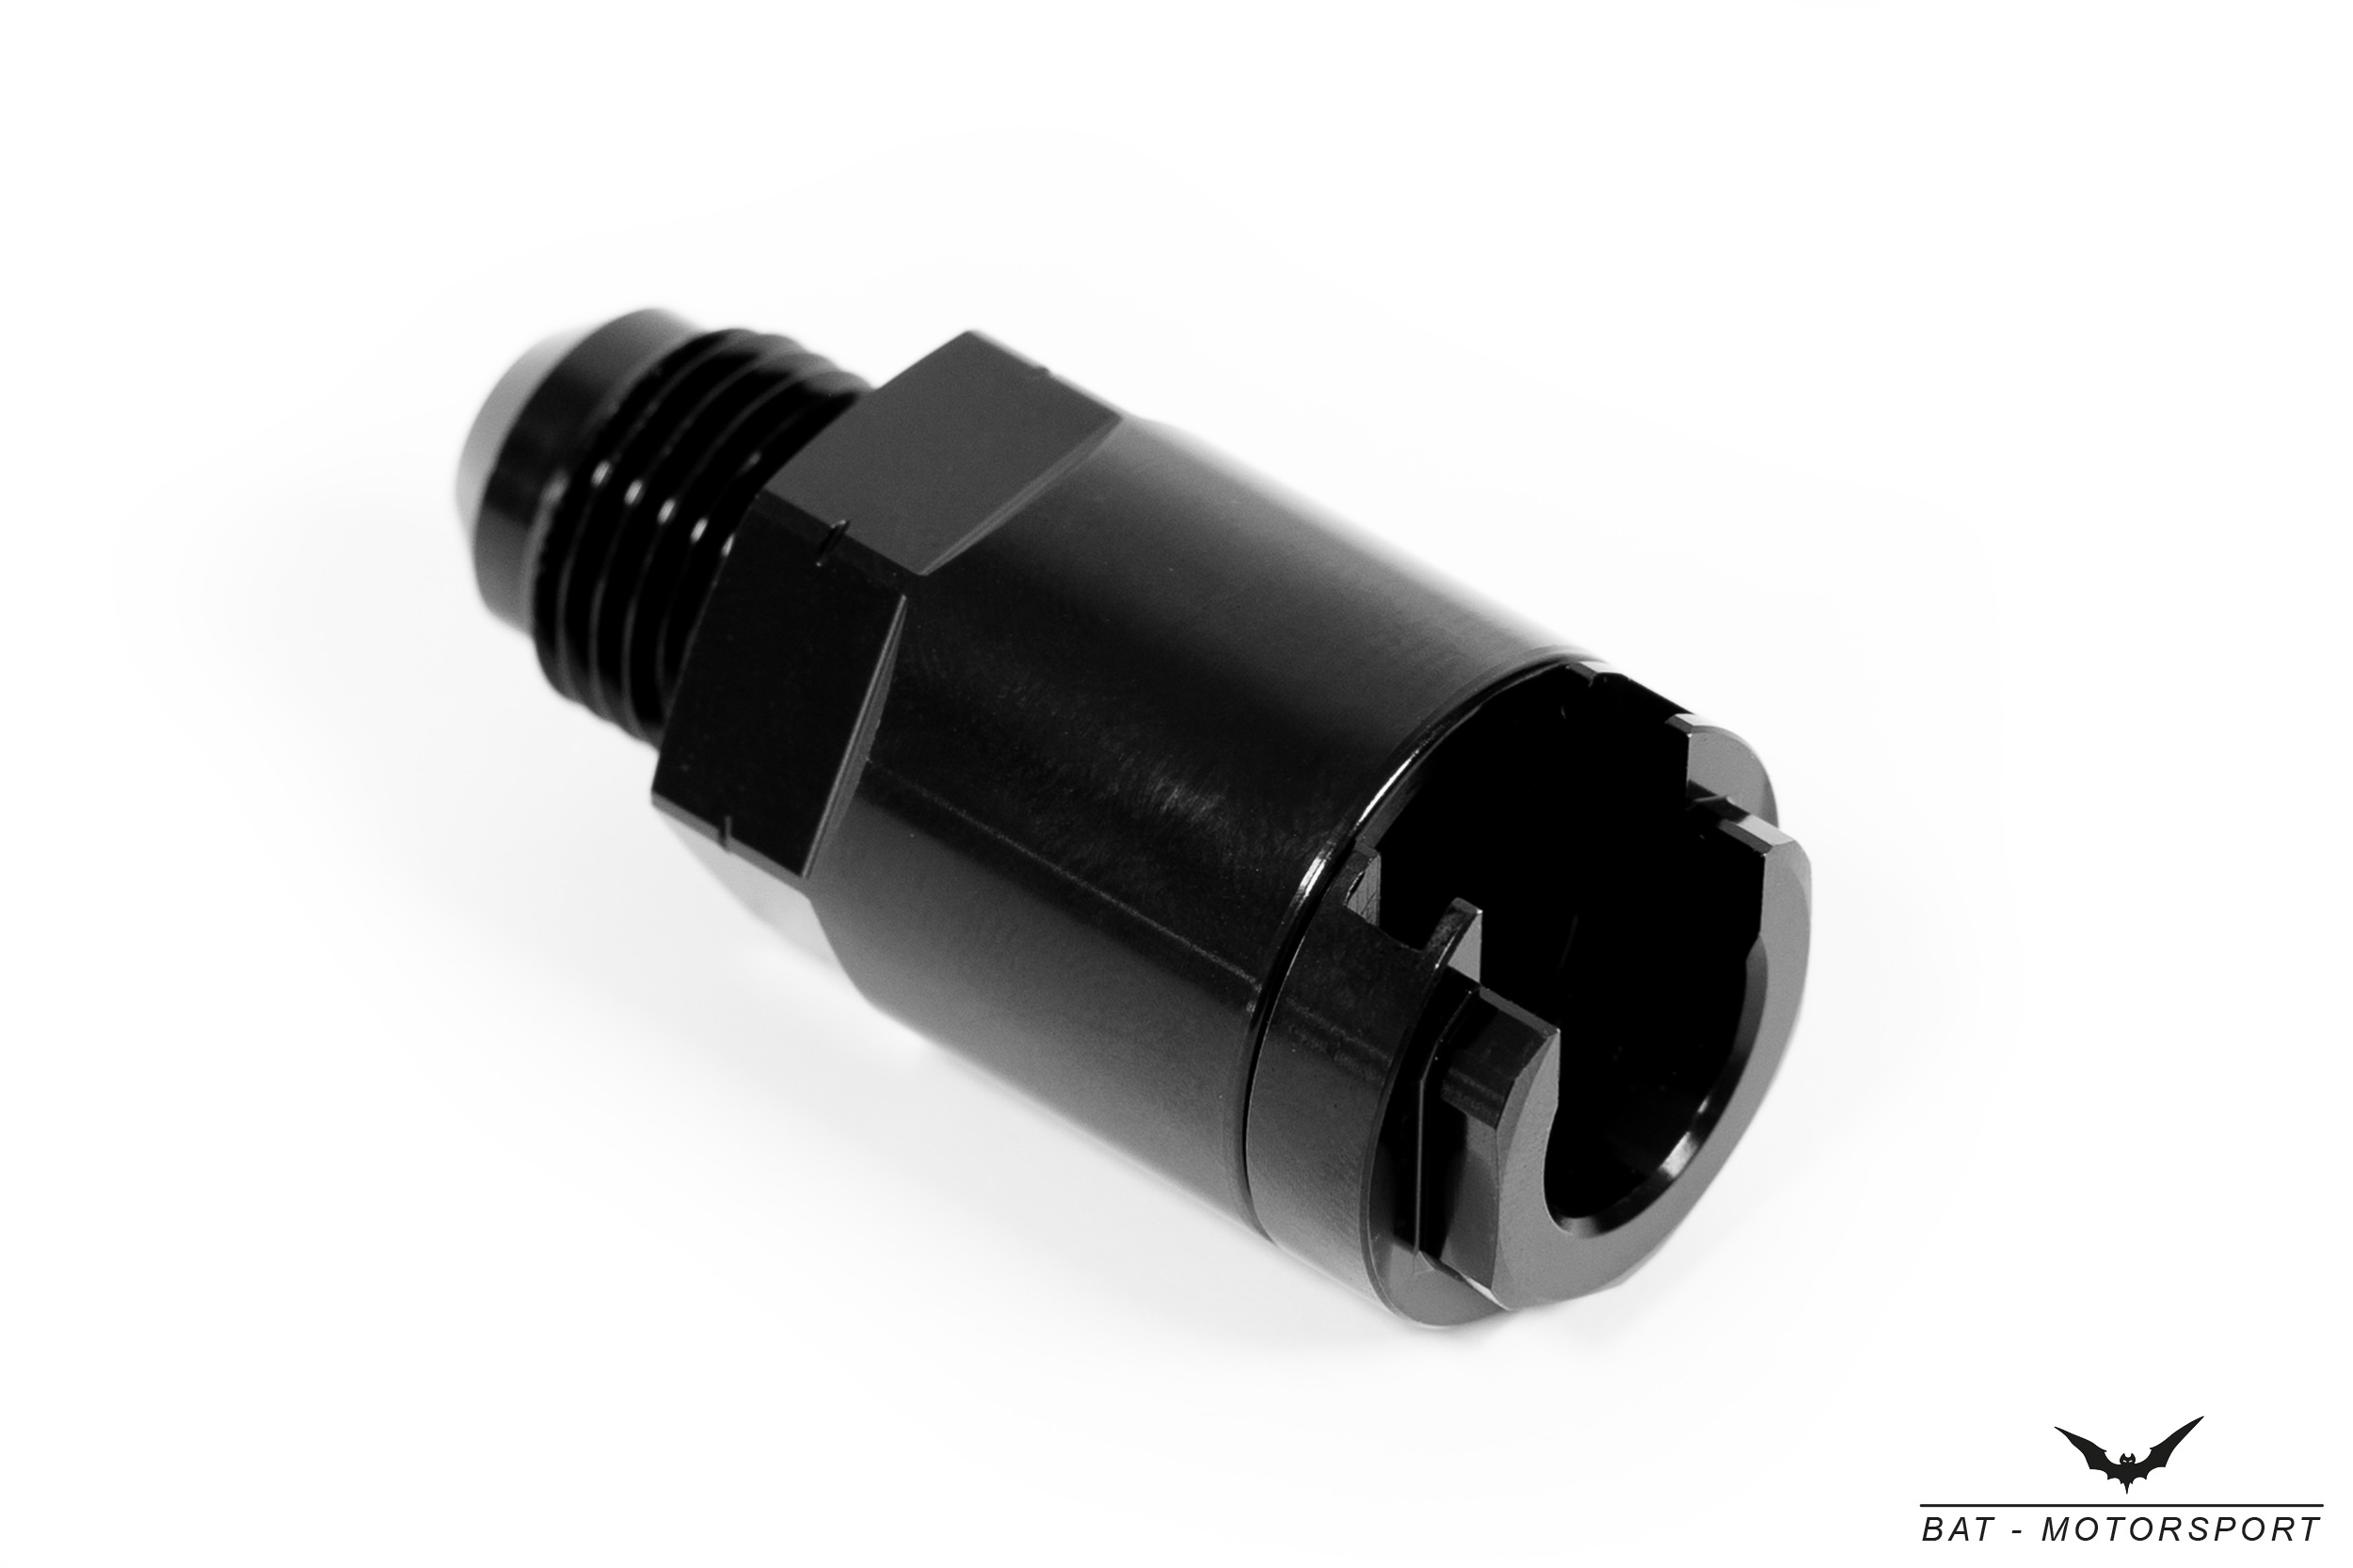 Quick disconnect coupling 9.5mm to Dash 6 for fuel line black